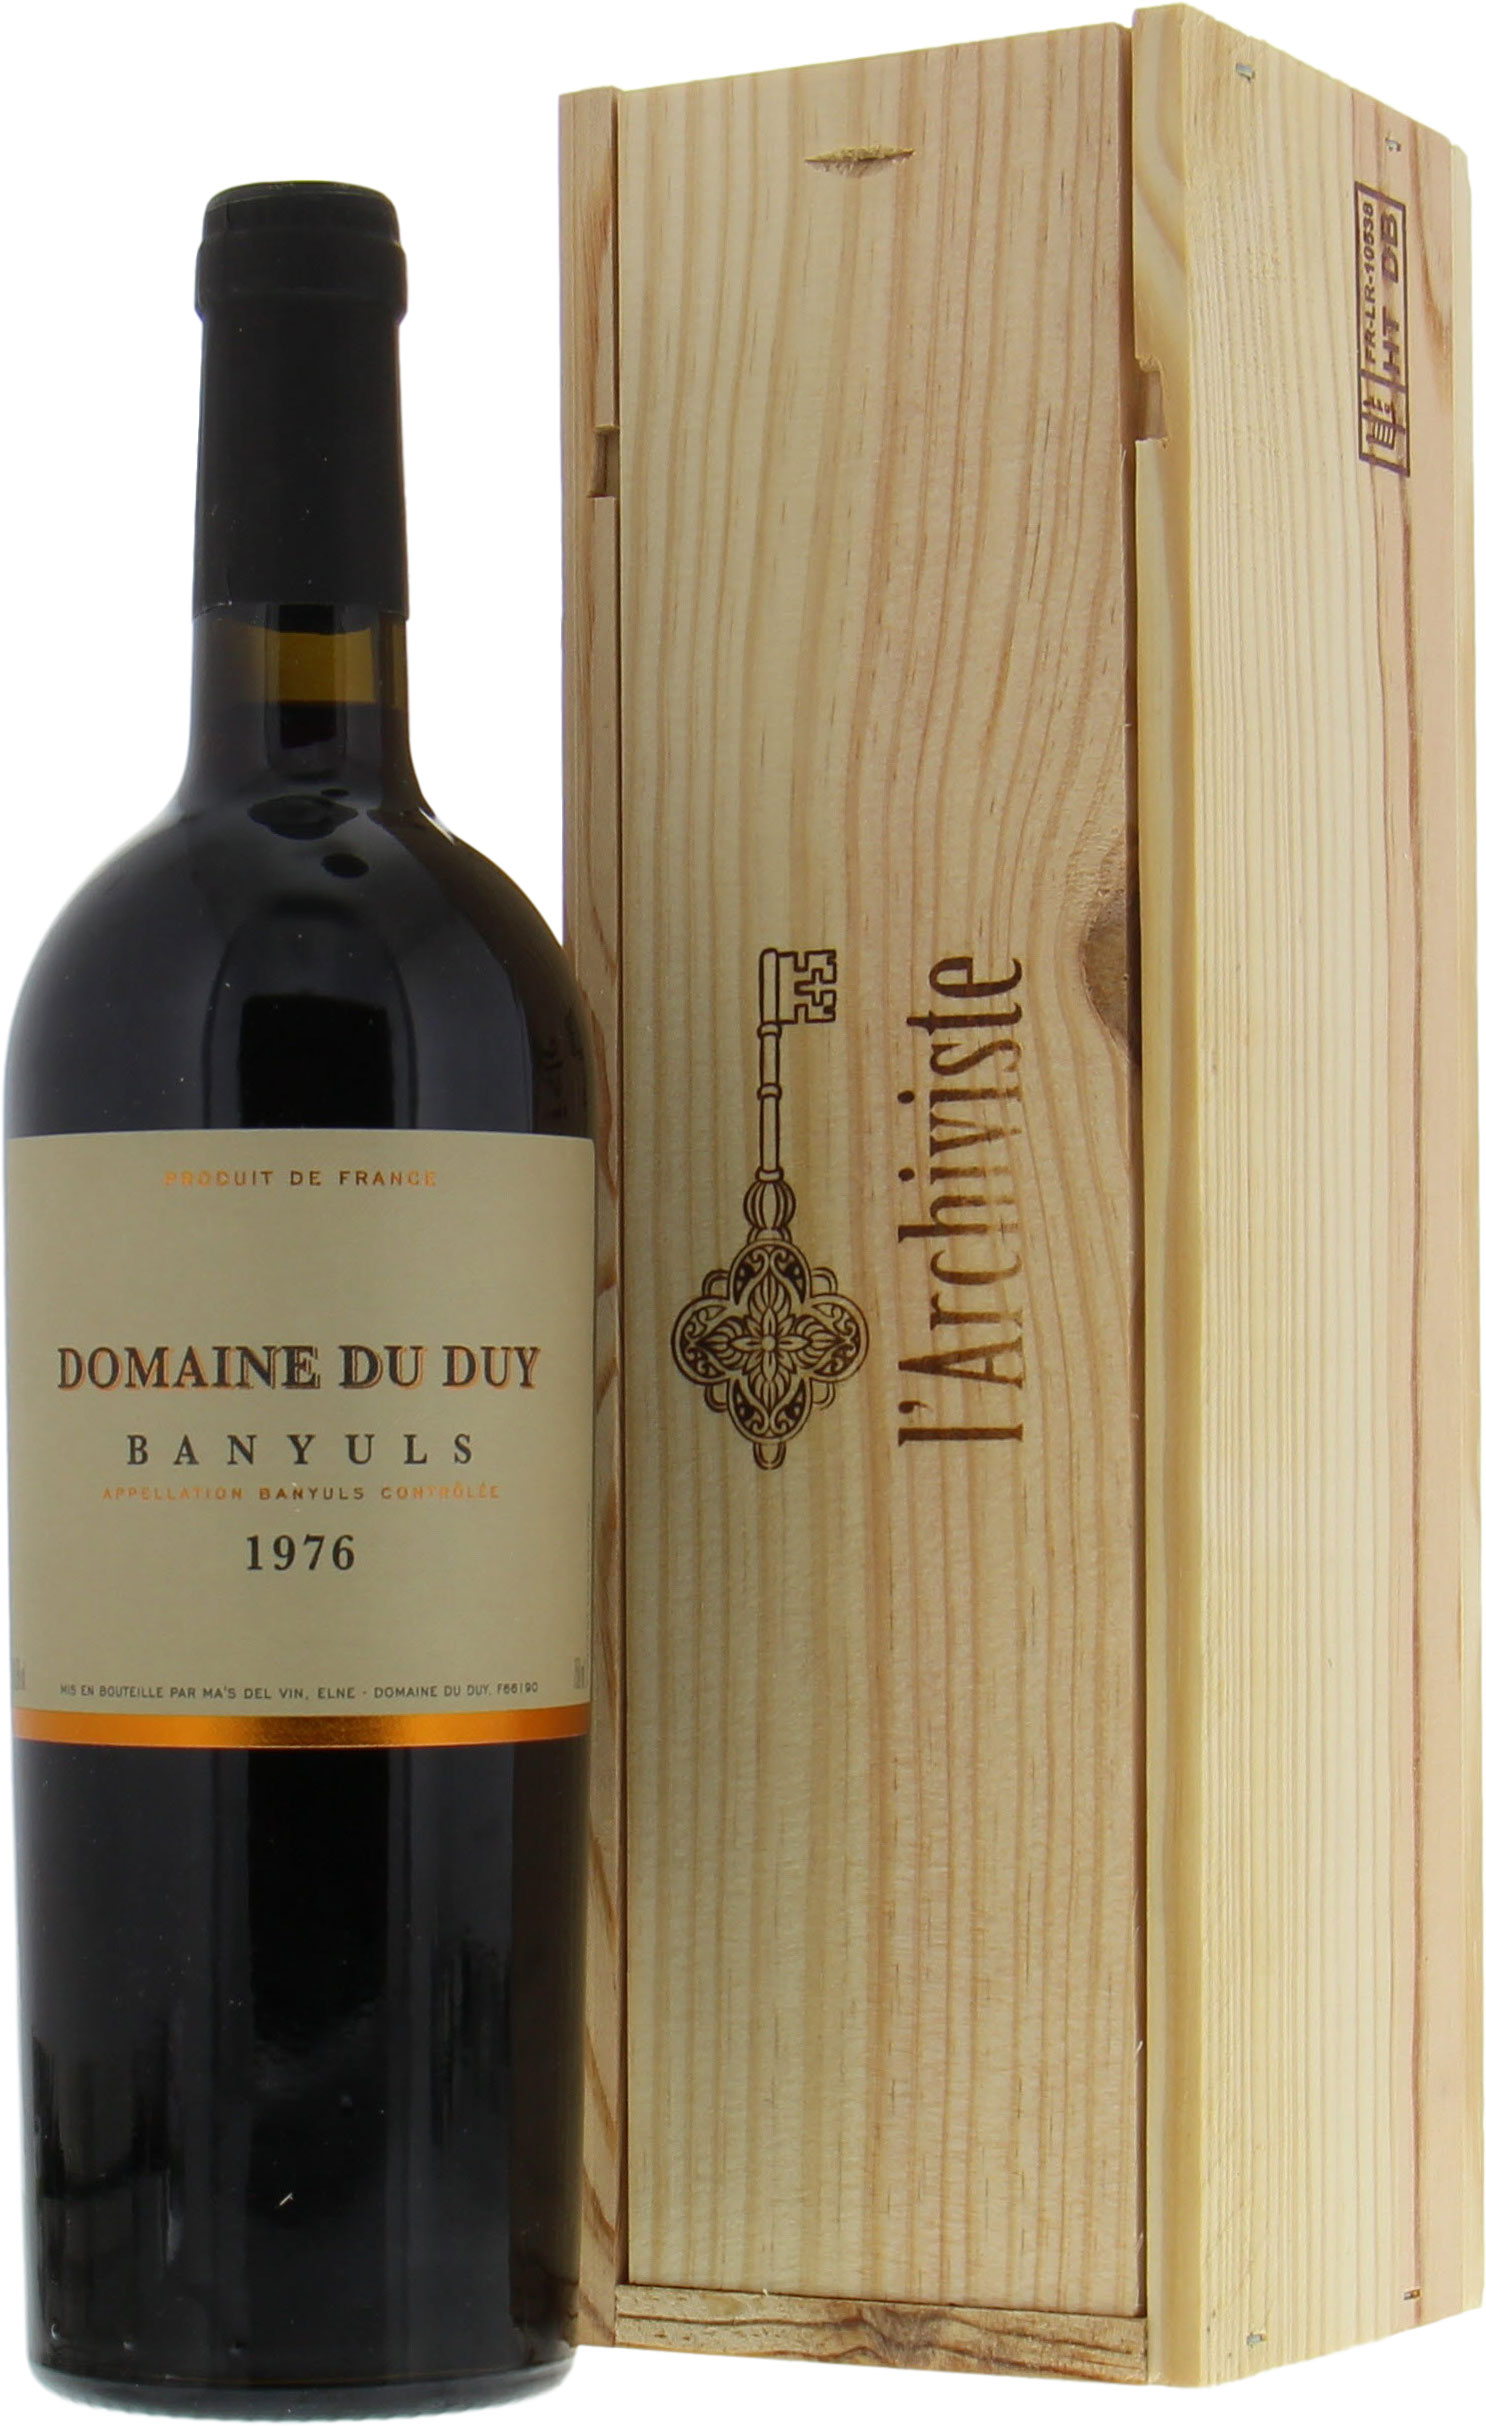 Domaine du Duy - Banyuls 1976 Perfect